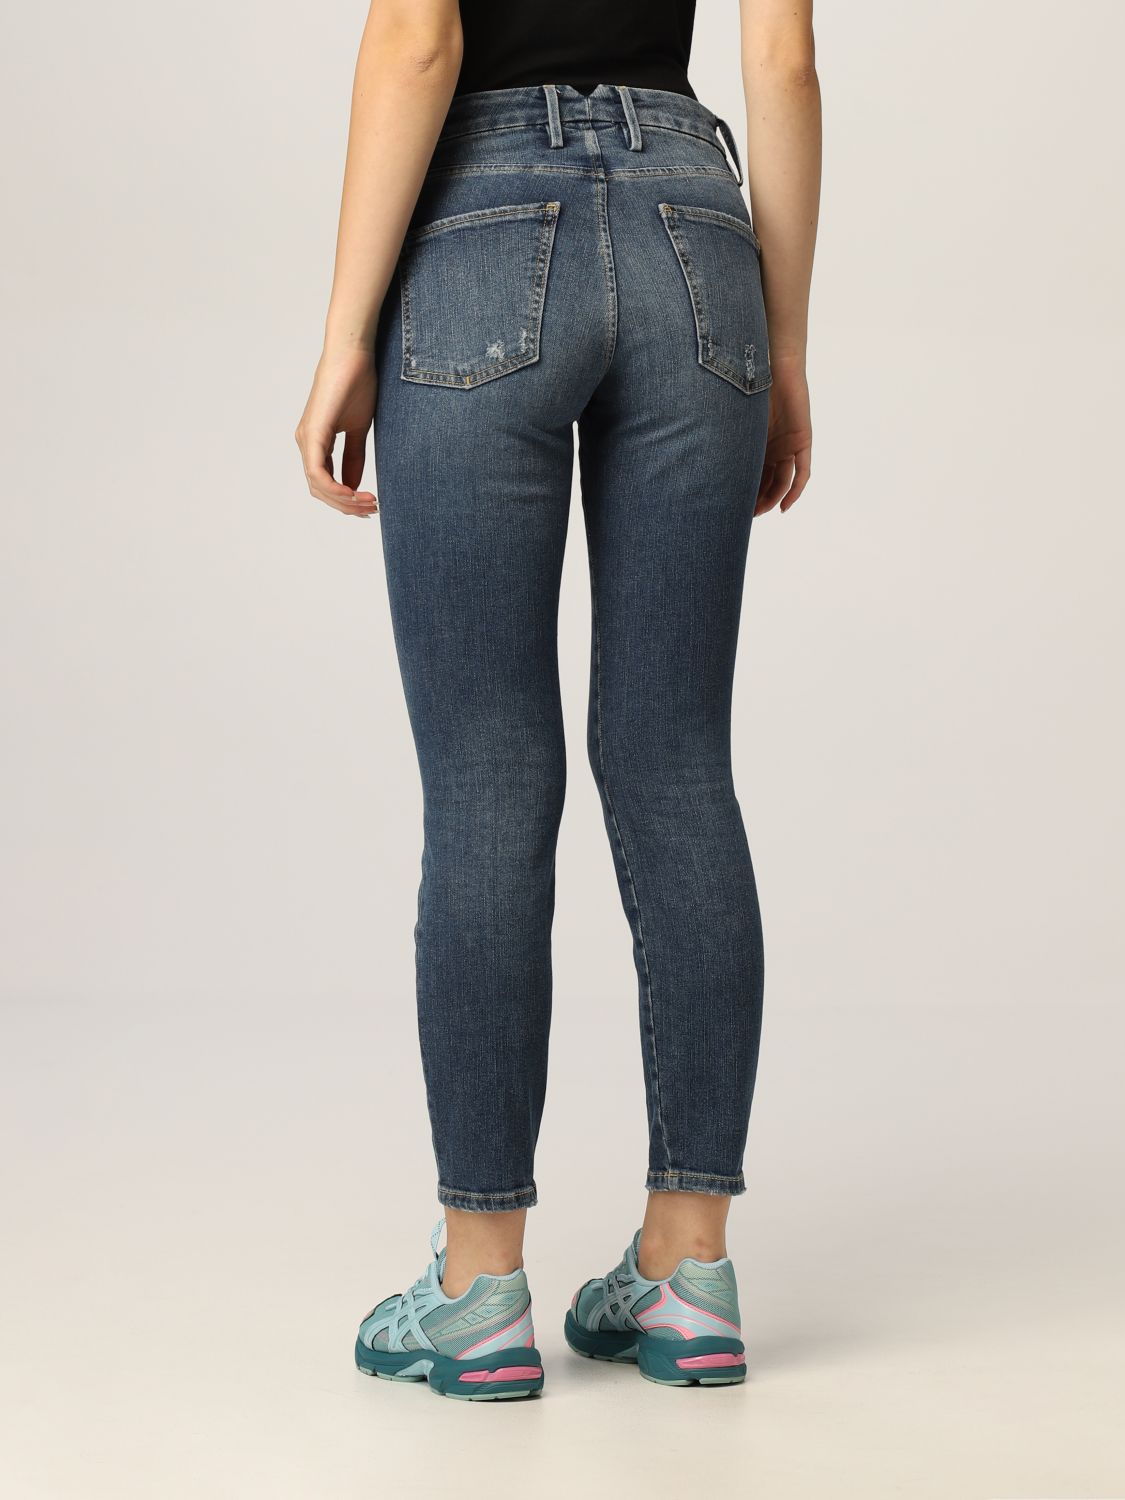 Jeans Cycle: Jeans women Cycle stone washed 2